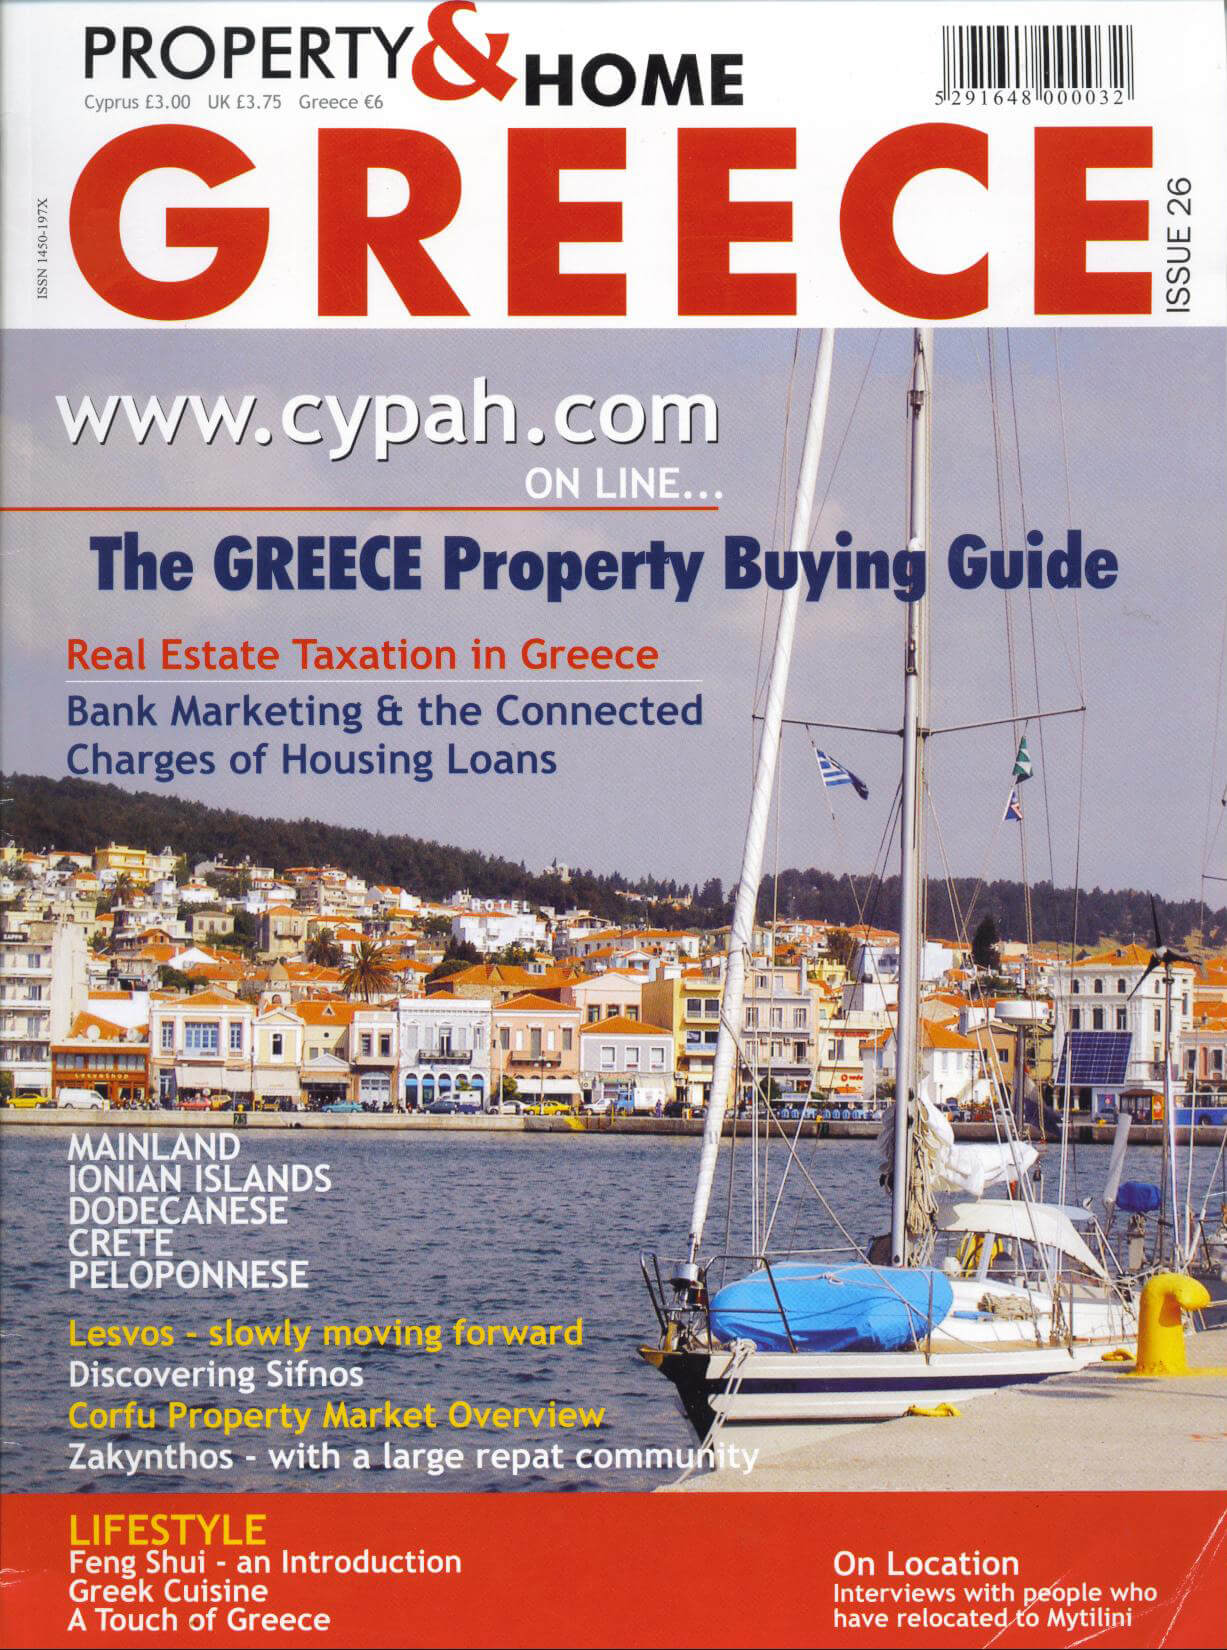 2006_ROU ESTATE_property&home greece_issue 26_cover